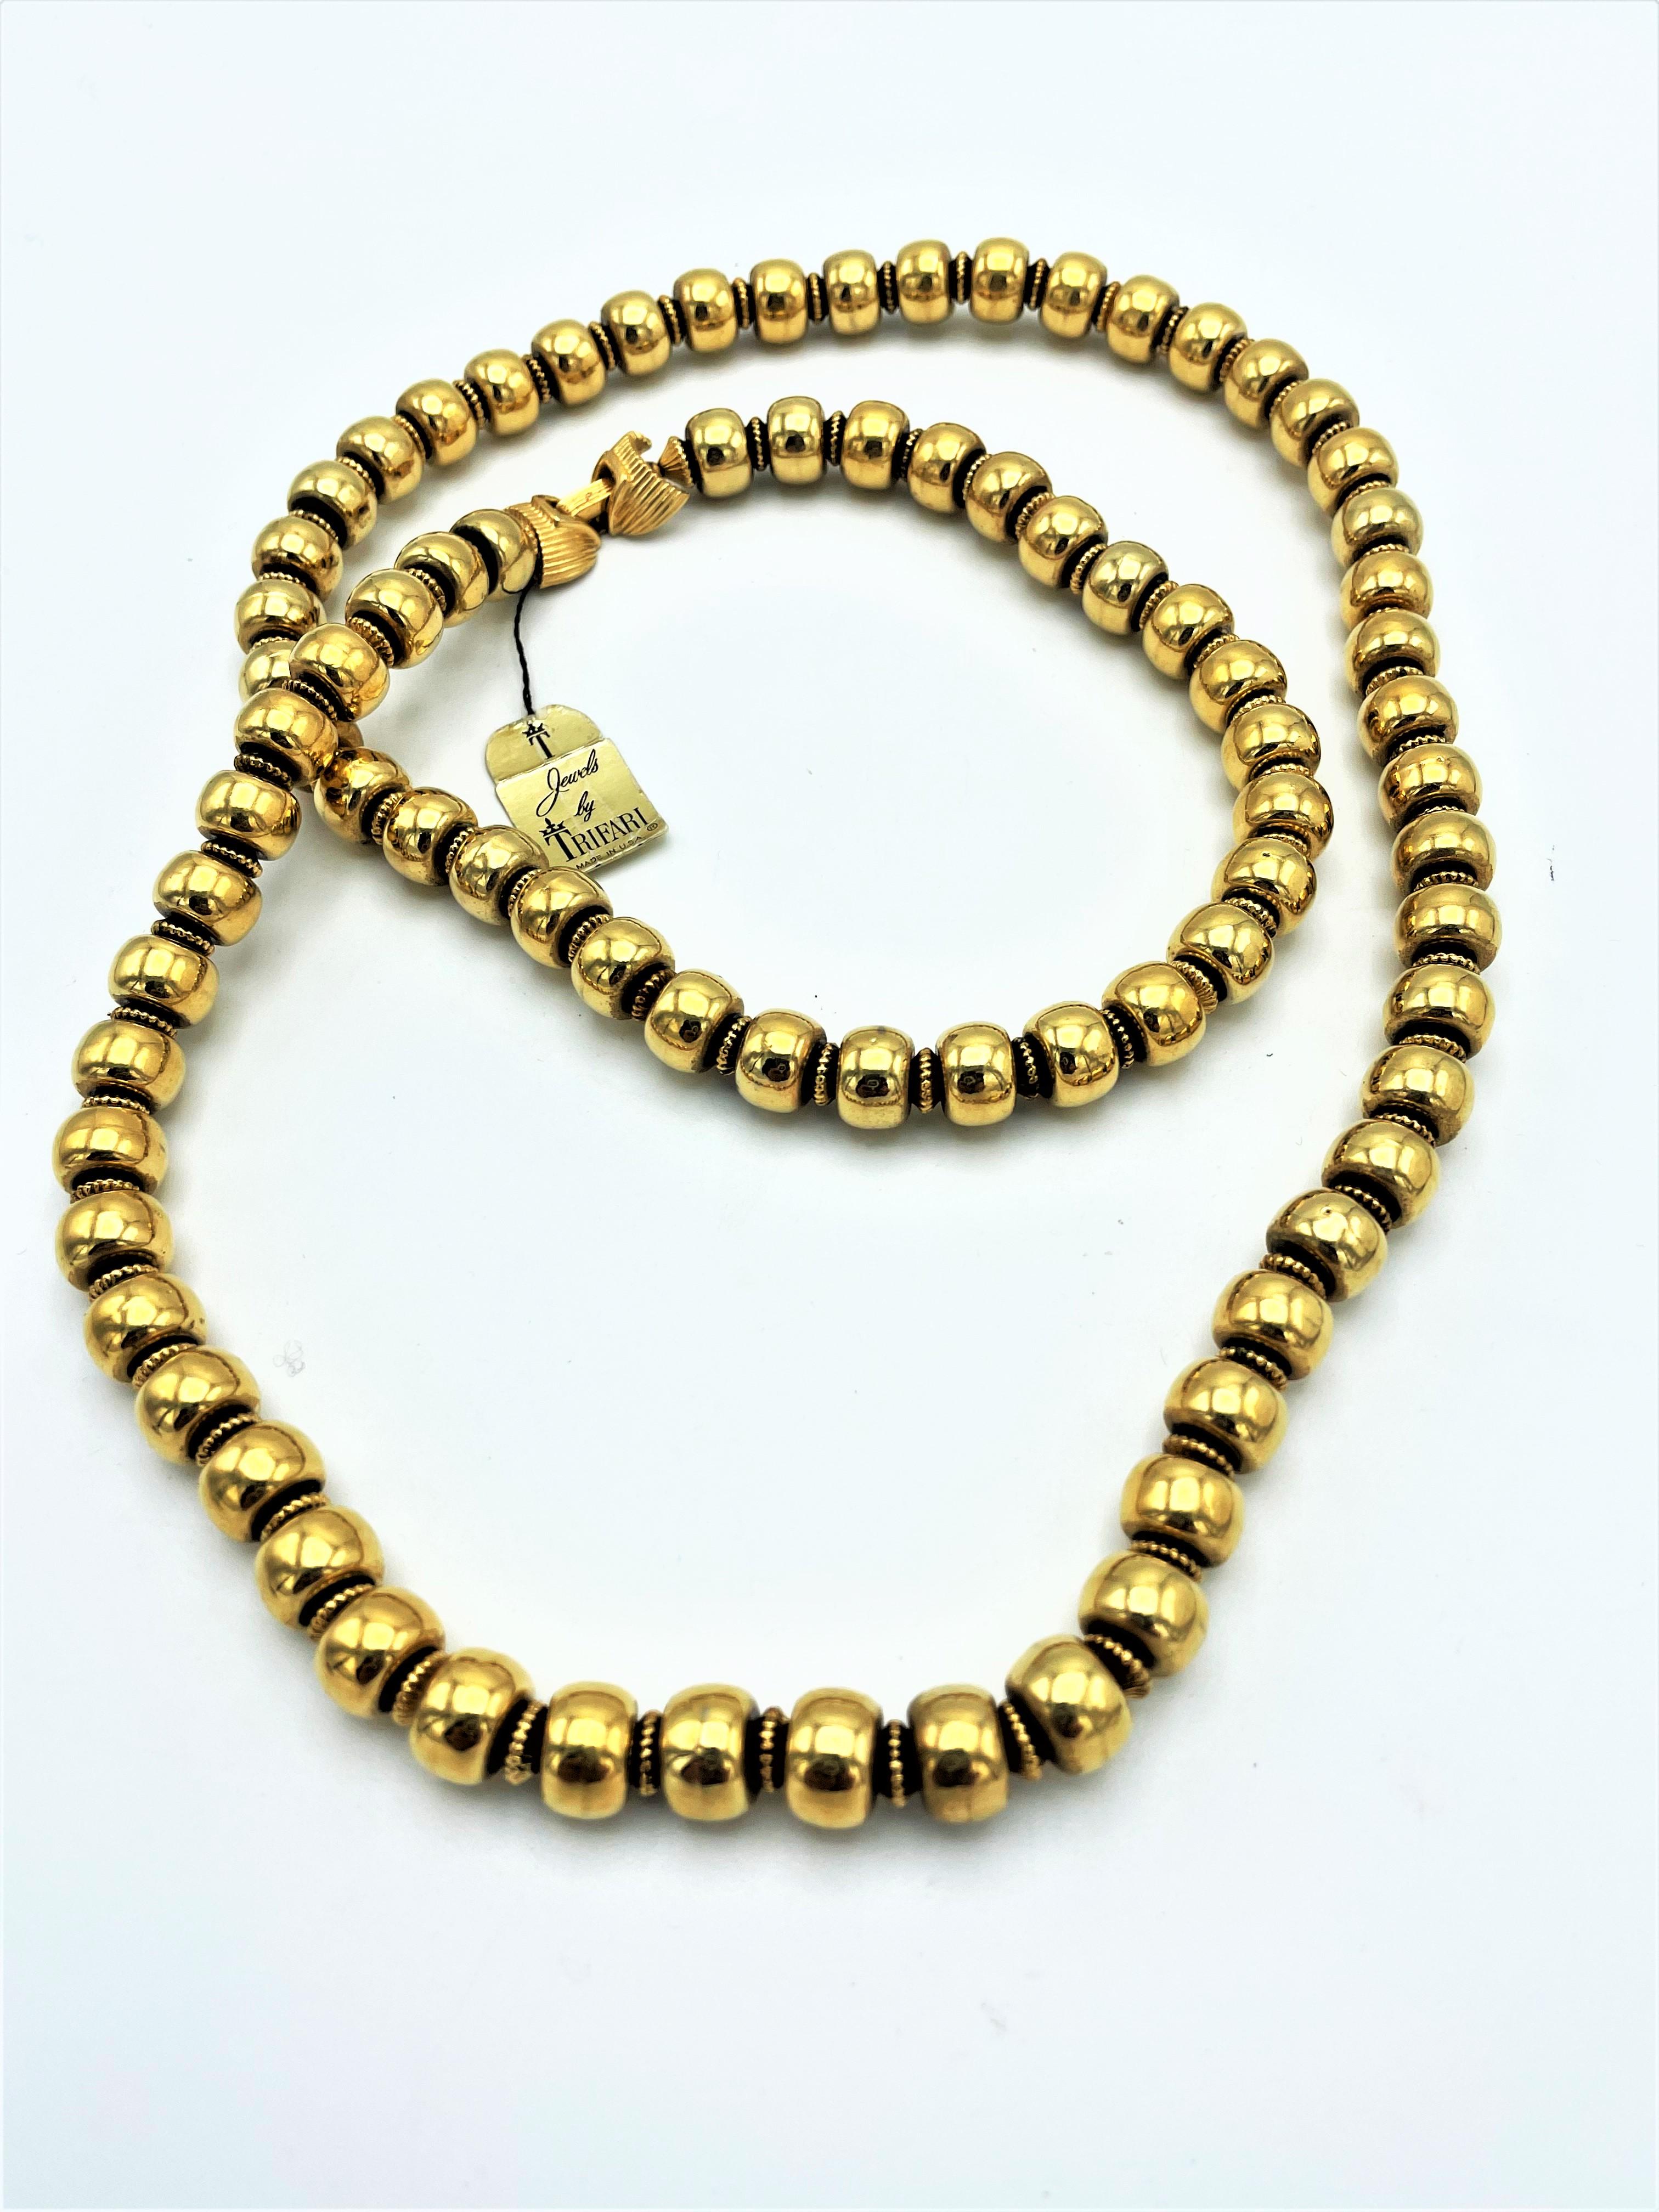 Long chain consisting of gold-plated balls that are flattened on the sides, with small serrated discs in between. The necklace has never been worn as the original 'Jewel of TRIFARI' label is still attached to the beautiful clasp. The balls are